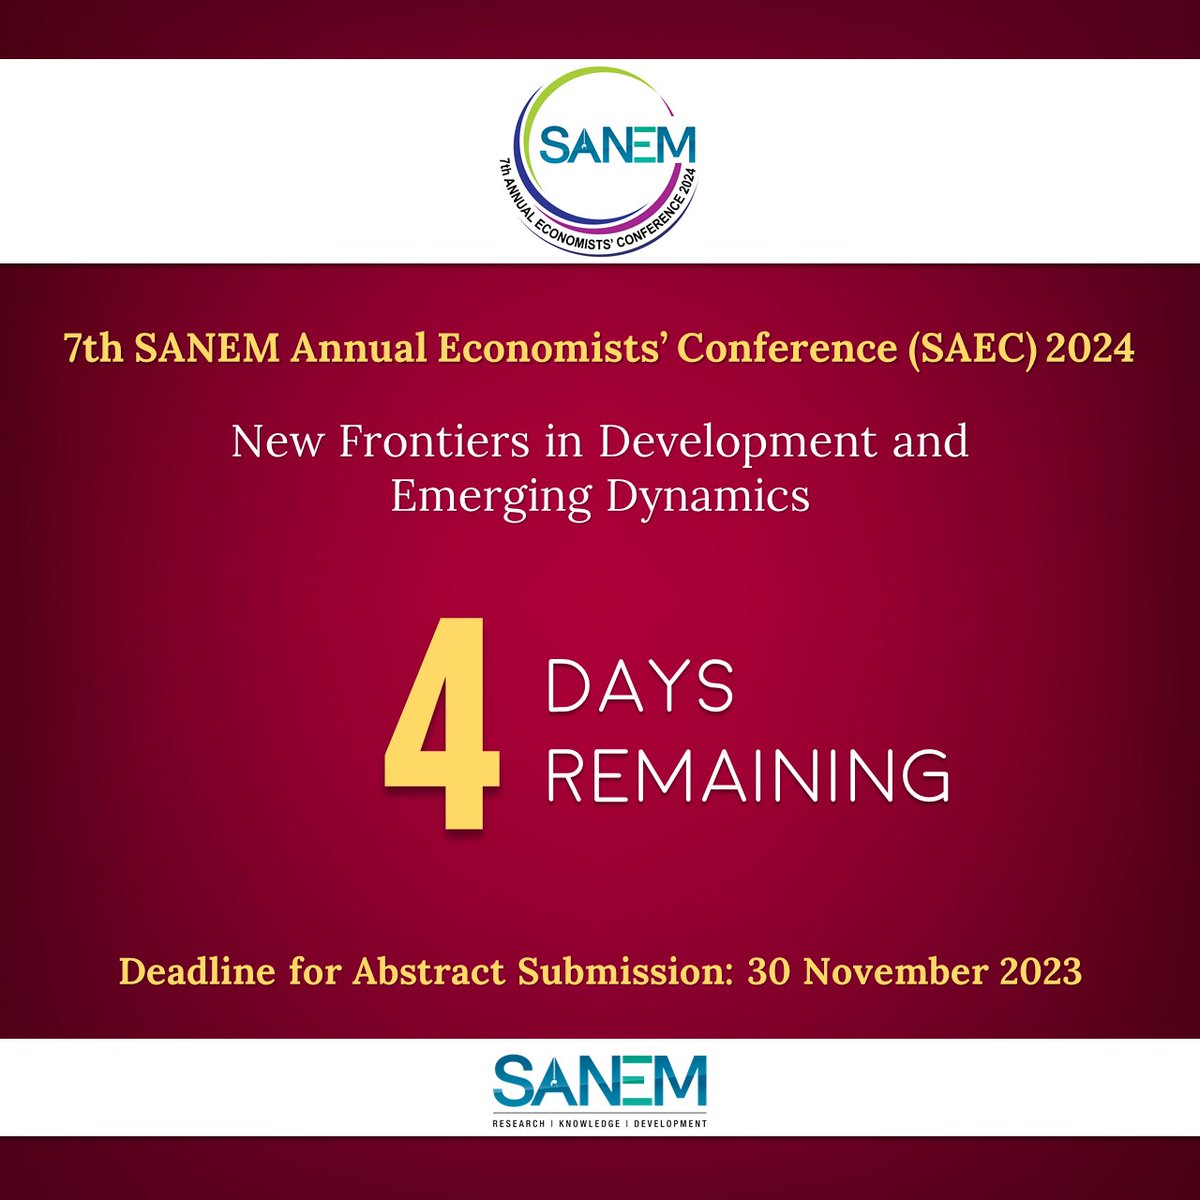 Extended abstracts with research objectives, methodology, and findings are due by Nov 30, 2023.
Send yours to sanem.conference@gmail.com.

For details on themes, guidelines, and conference info: sanemnet.org/7th-sanem-annu…

#SAEC2024 #CallForPapers #EconomicResearch #DeadlineAlert